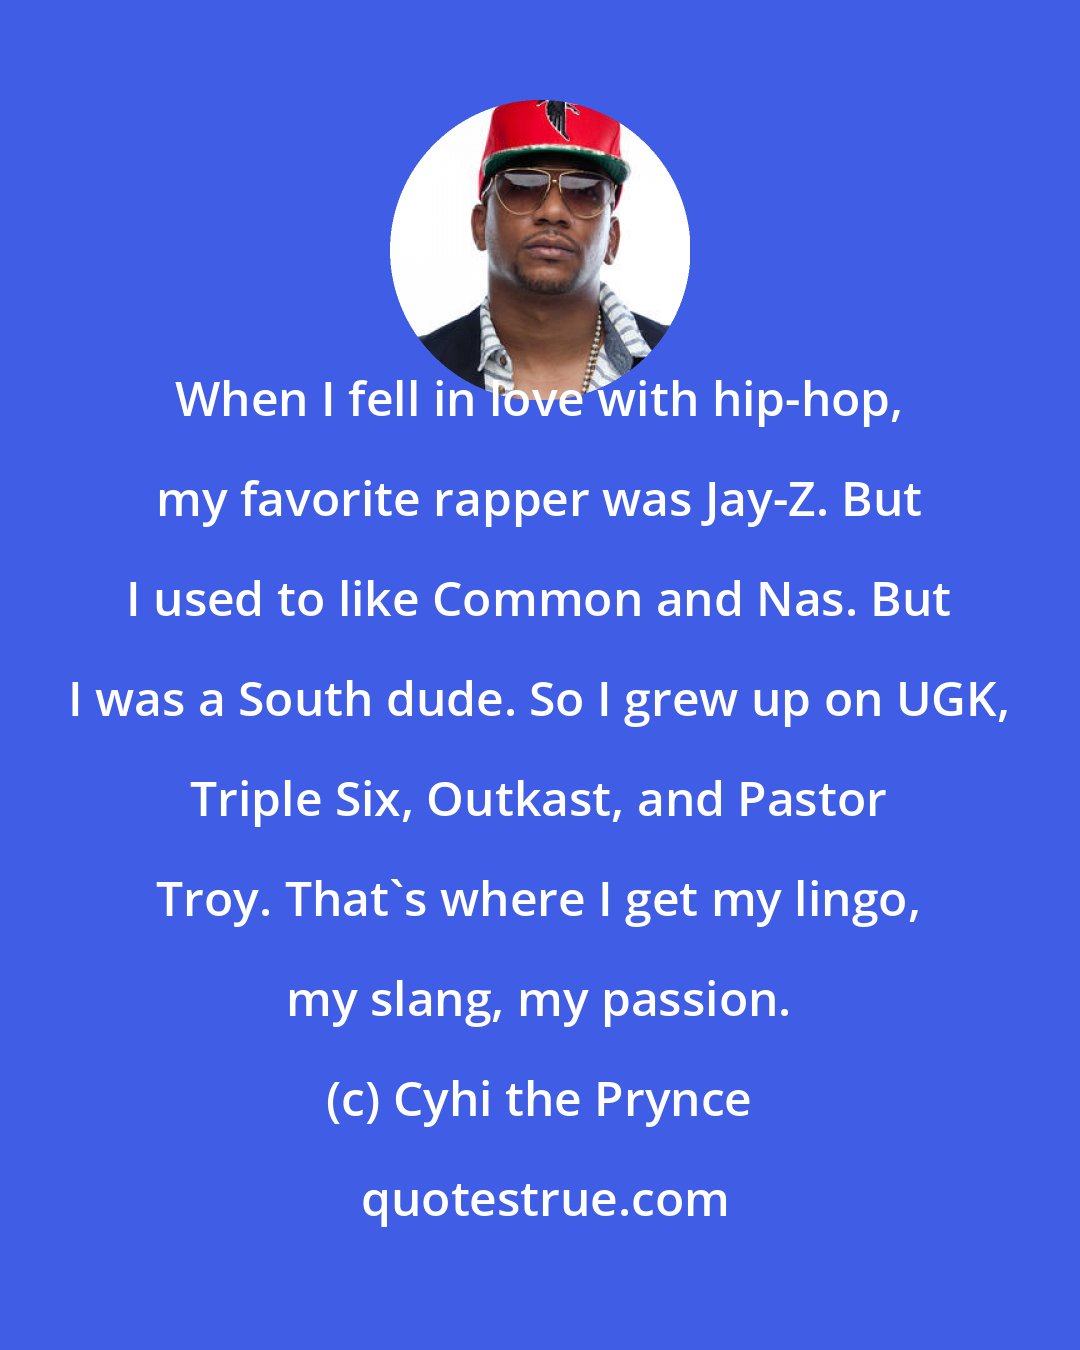 Cyhi the Prynce: When I fell in love with hip-hop, my favorite rapper was Jay-Z. But I used to like Common and Nas. But I was a South dude. So I grew up on UGK, Triple Six, Outkast, and Pastor Troy. That's where I get my lingo, my slang, my passion.